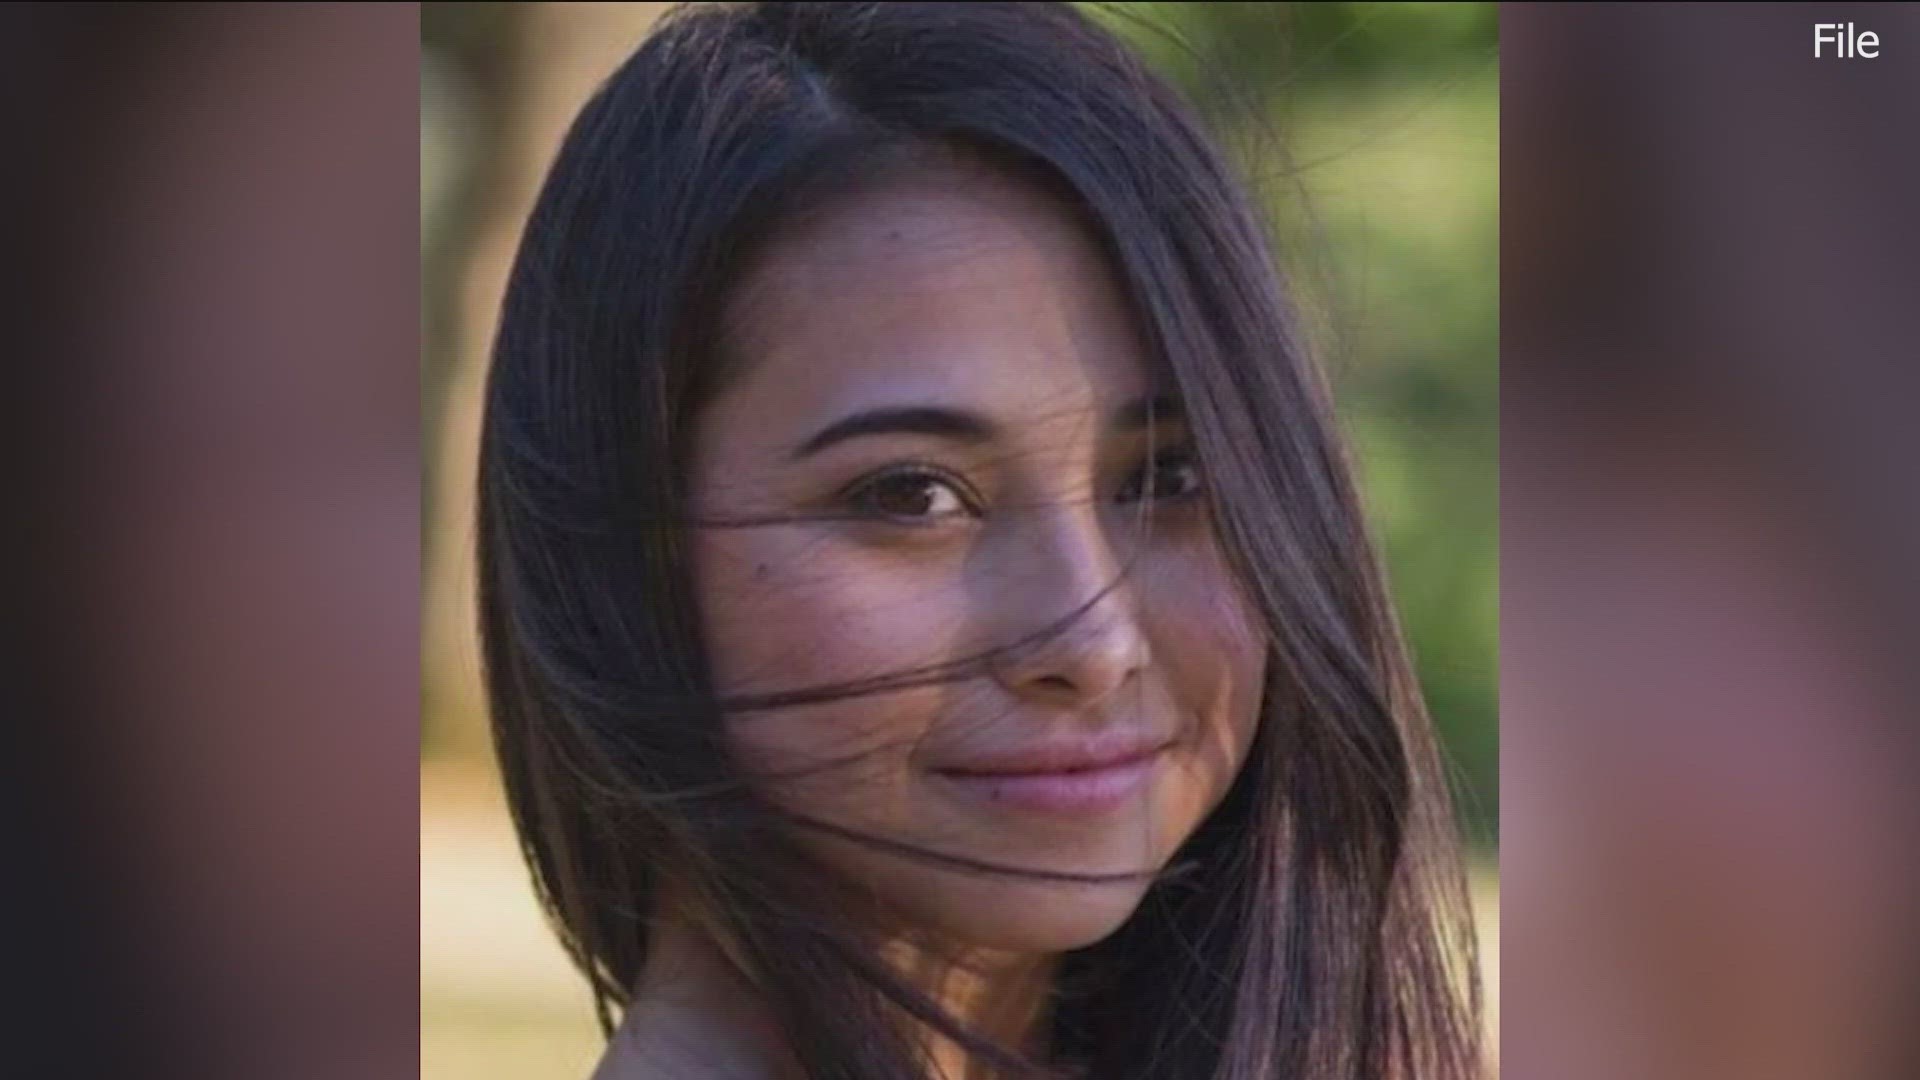 Wednesday, April 3, marks eight years since University of Texas student Haruka Weiser was raped and murdered after walking home from campus.